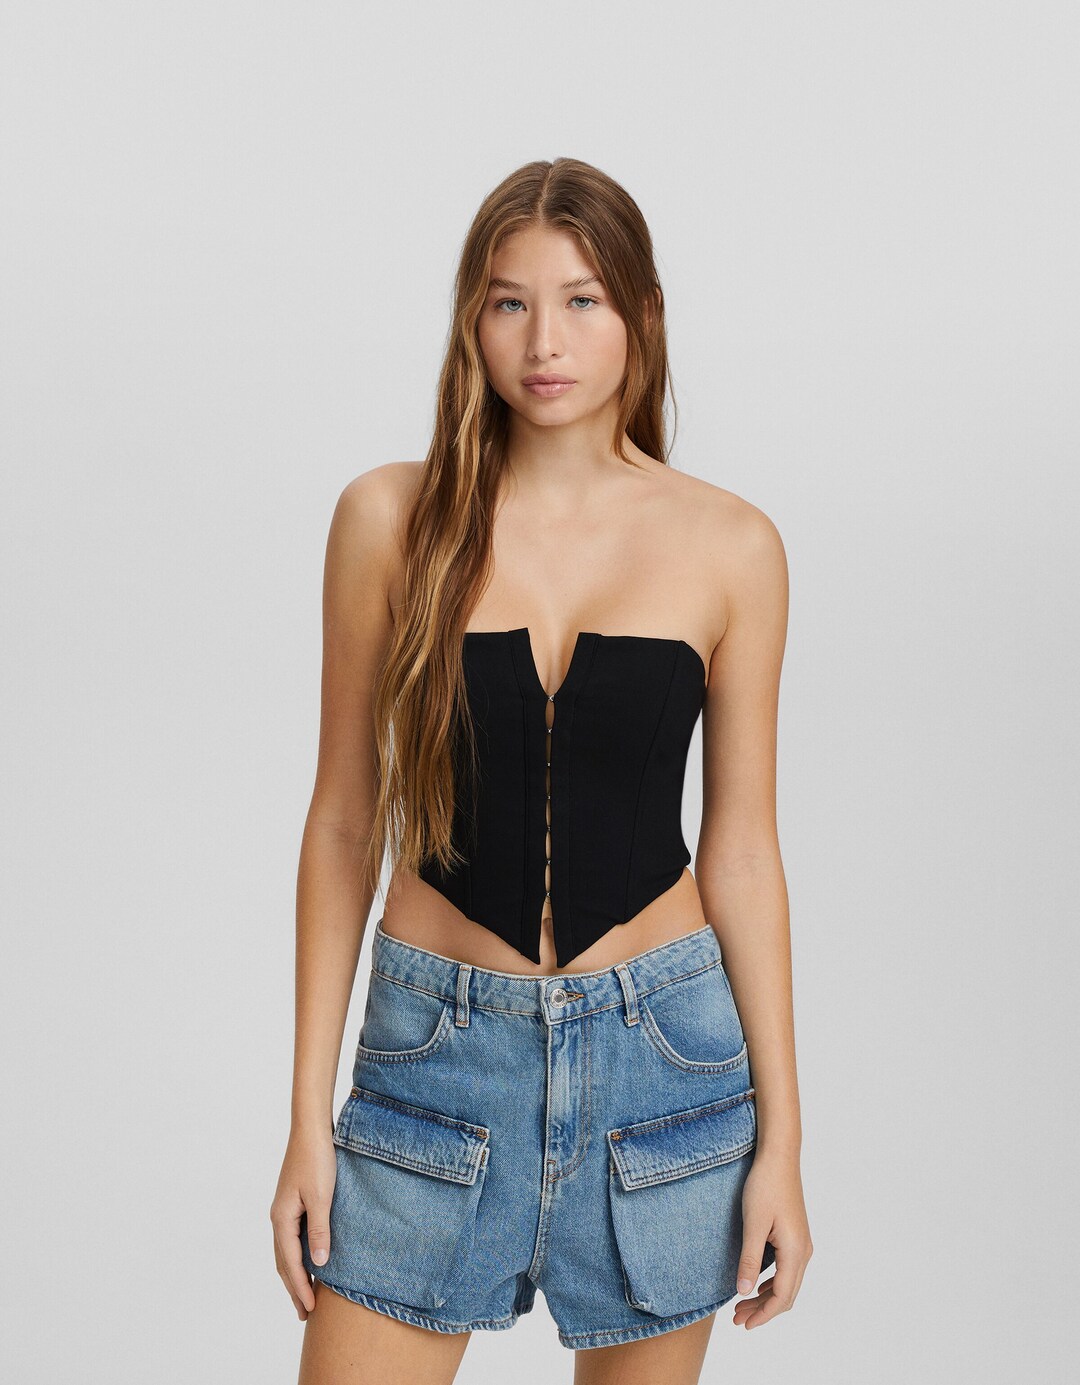 Bandeau top with hook-and-eye clasps